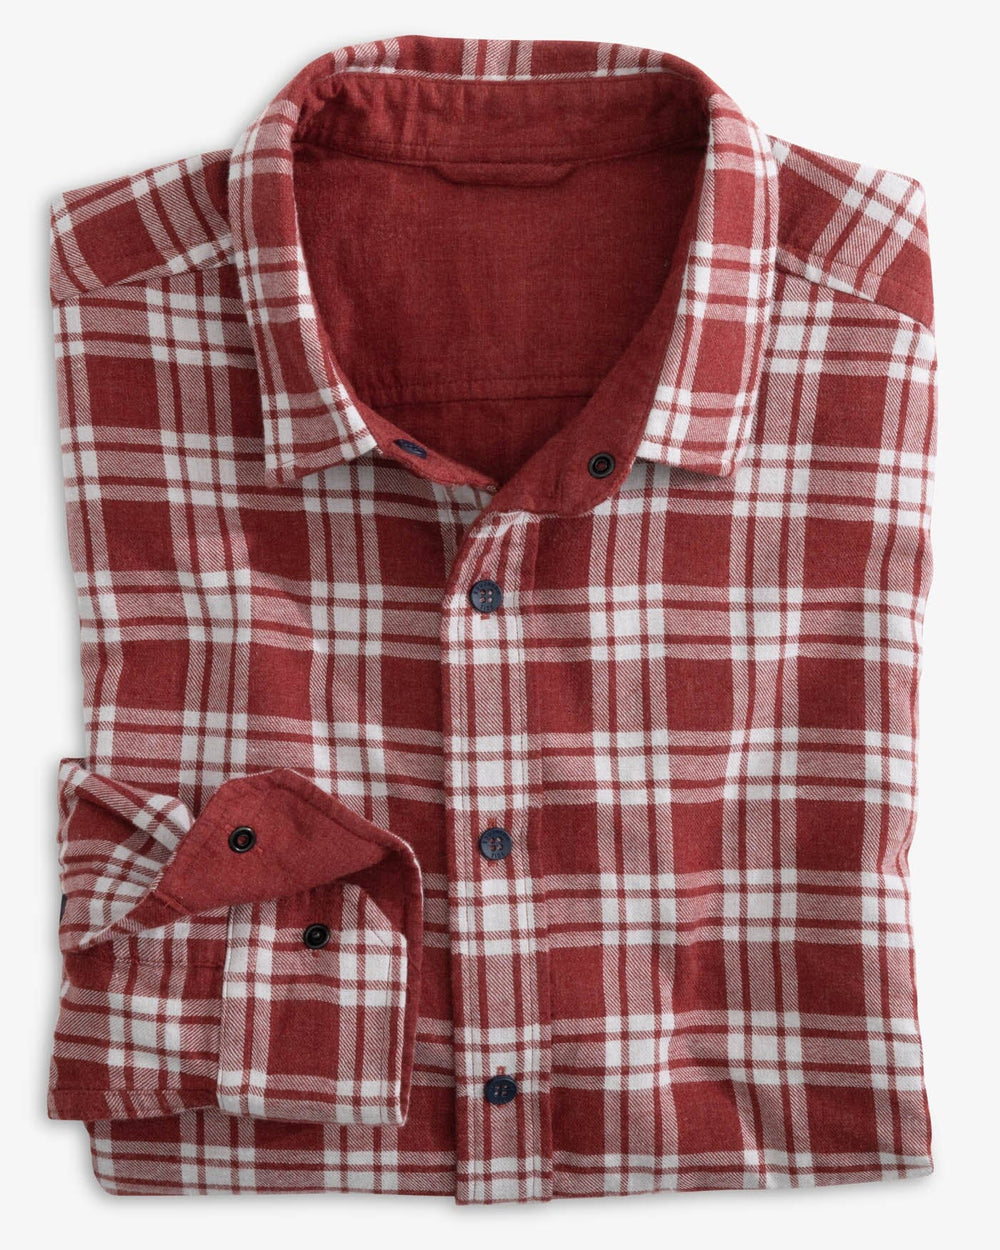 The front view of the Southern Tide Heather Melbourne Reversible Plaid Sport Shirt by Southern Tide - Heather Tuscany Red